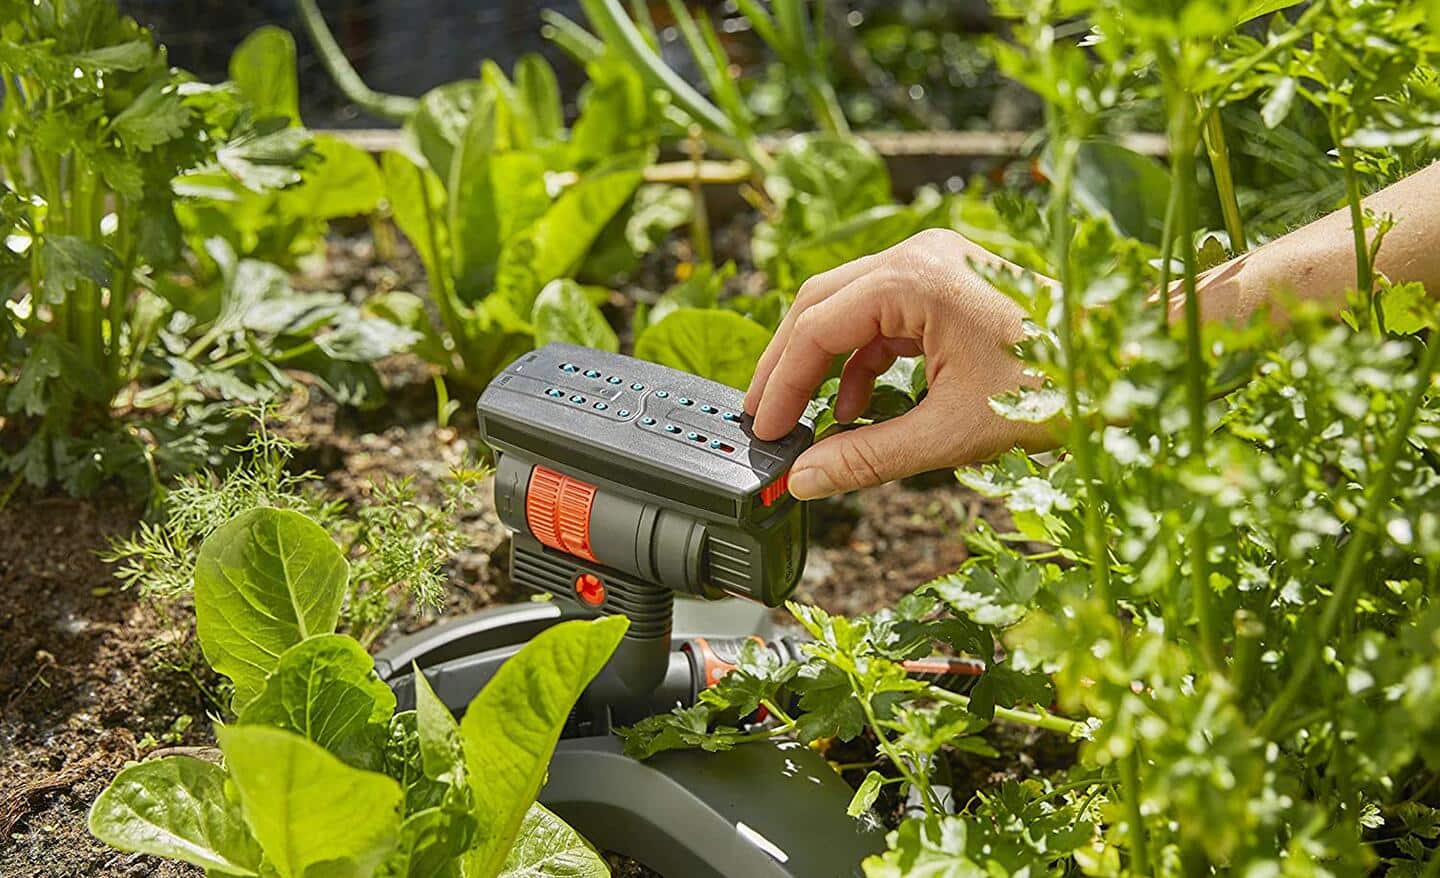 Gardener sets irrigation timer attached to a hose in a garden bed